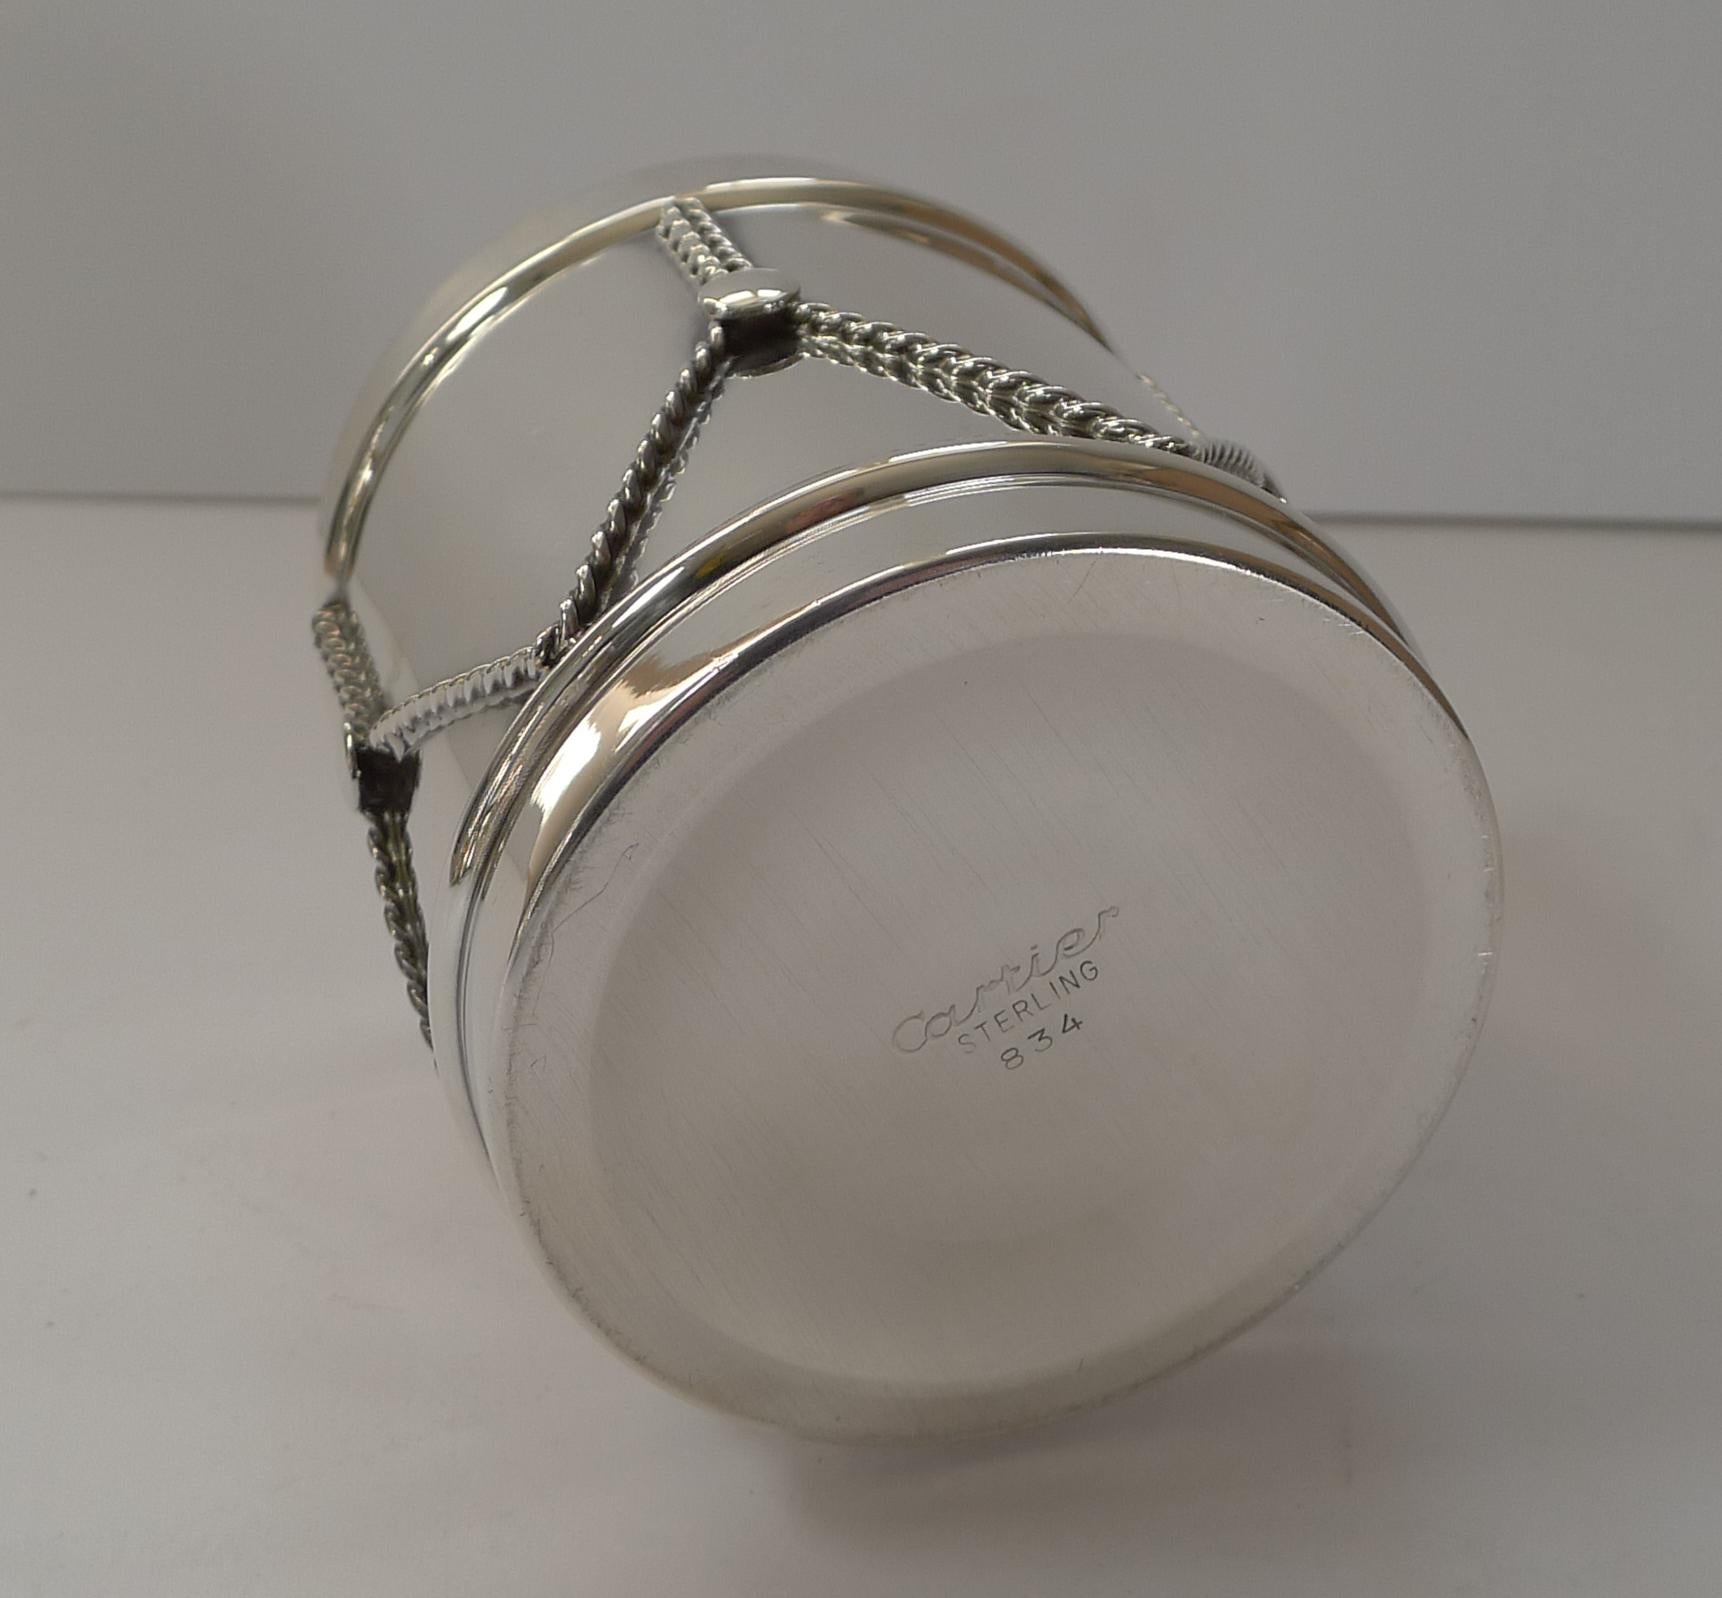 French Cartier Sterling Silver Novelty Drum Box